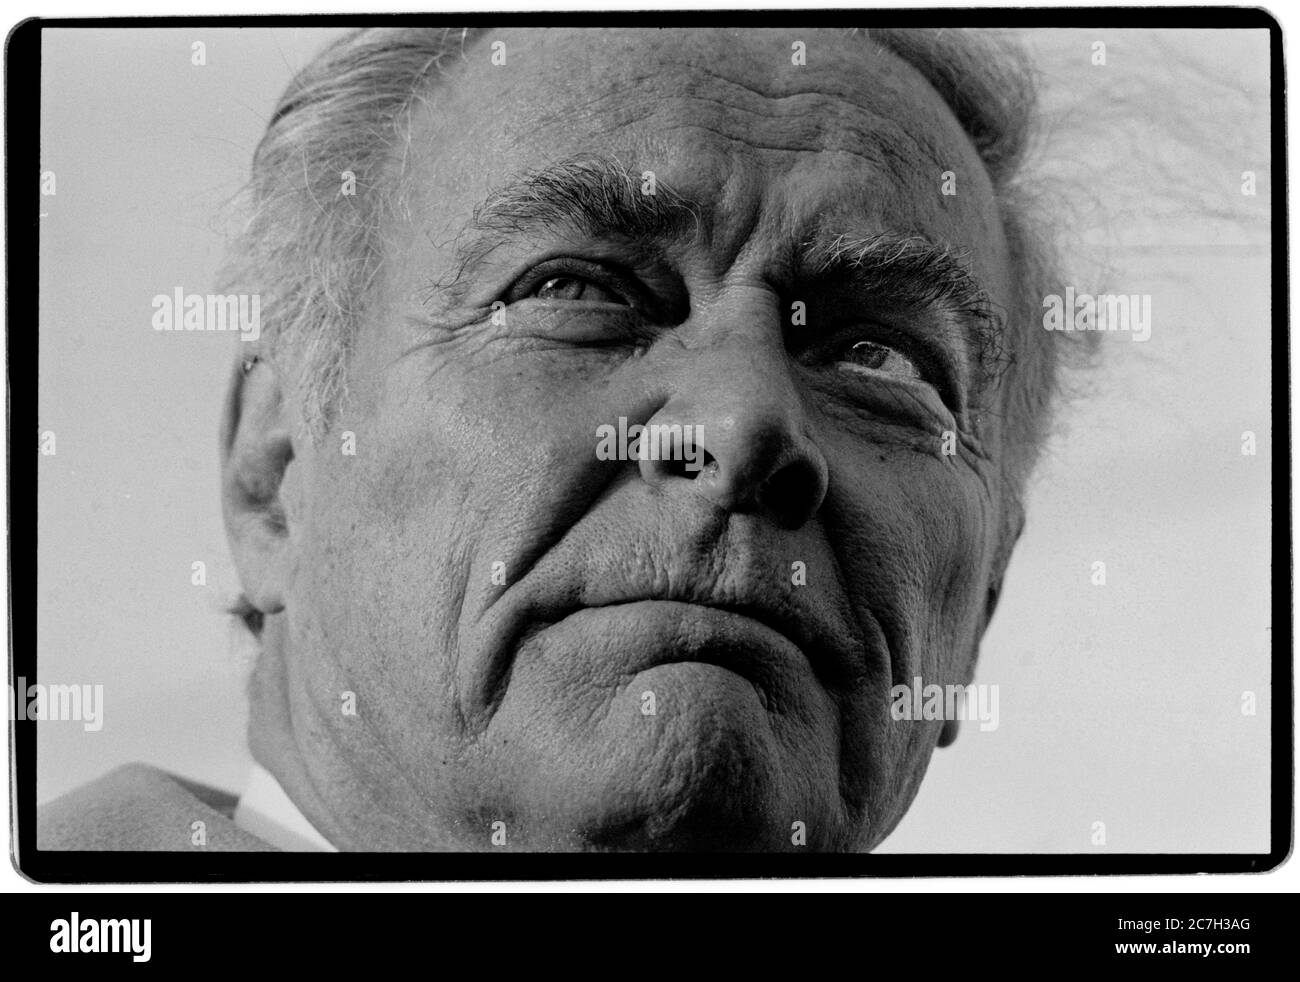 US Presidential Election Campaign 1988 Al Haig on the campaign trail during the New Hampshire Primaries in February 1988 Alexander Meigs Haig Jr. December 2, 1924 – February 20, 2010) was the United States Secretary of State under President Ronald Reagan and the White House chief of staff under presidents Richard Nixon and Gerald Ford.General, Prior to these cabinet-level positions, he retired as a general from the United States Army, having been Supreme Allied Commander Europe after serving as the vice chief of staff of the Army. Stock Photo